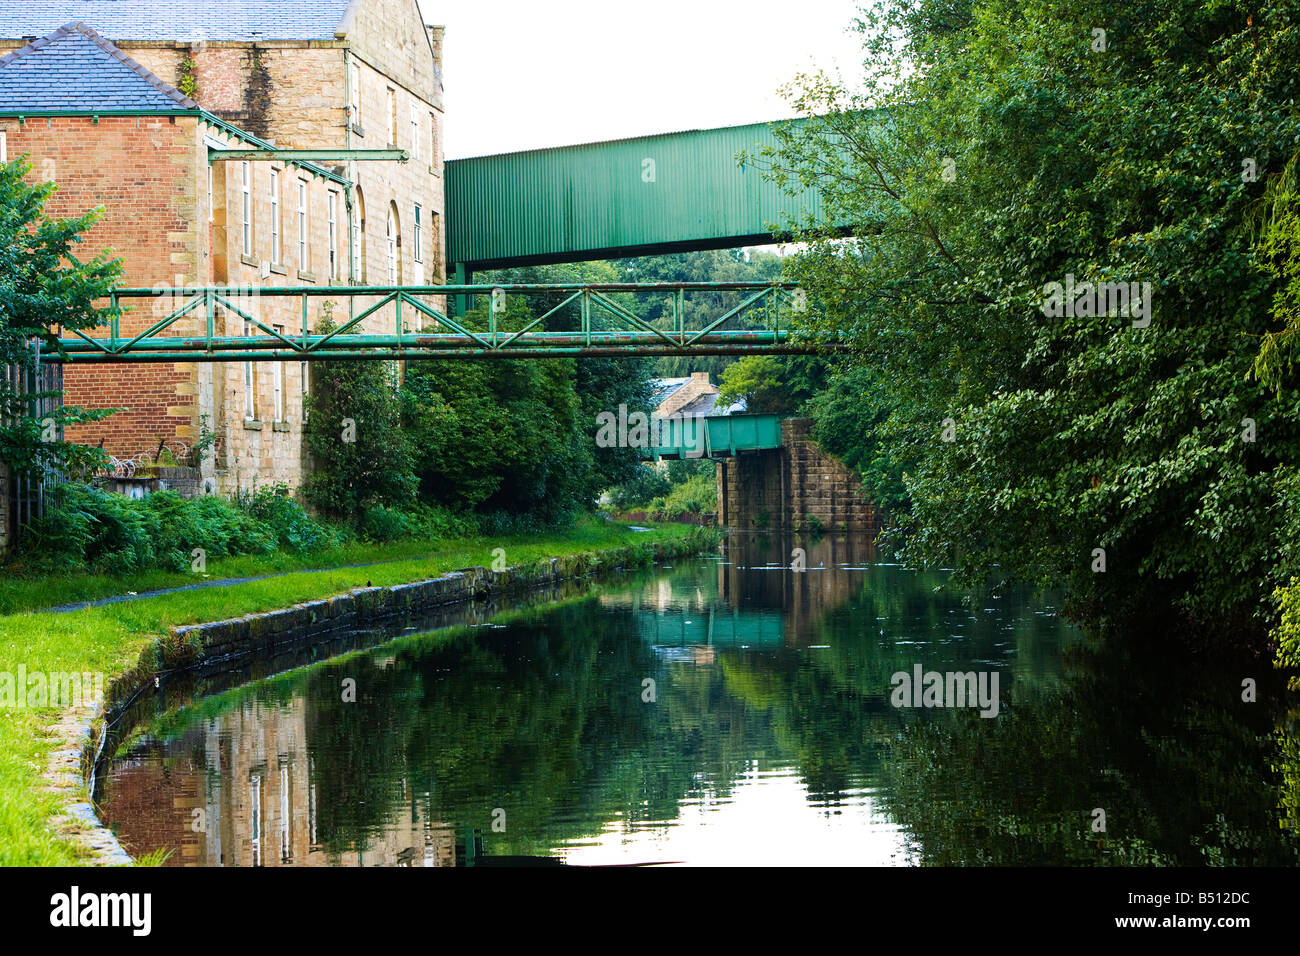 Old warehouses and bridges over the Leeds Liverpool canal Stock Photo